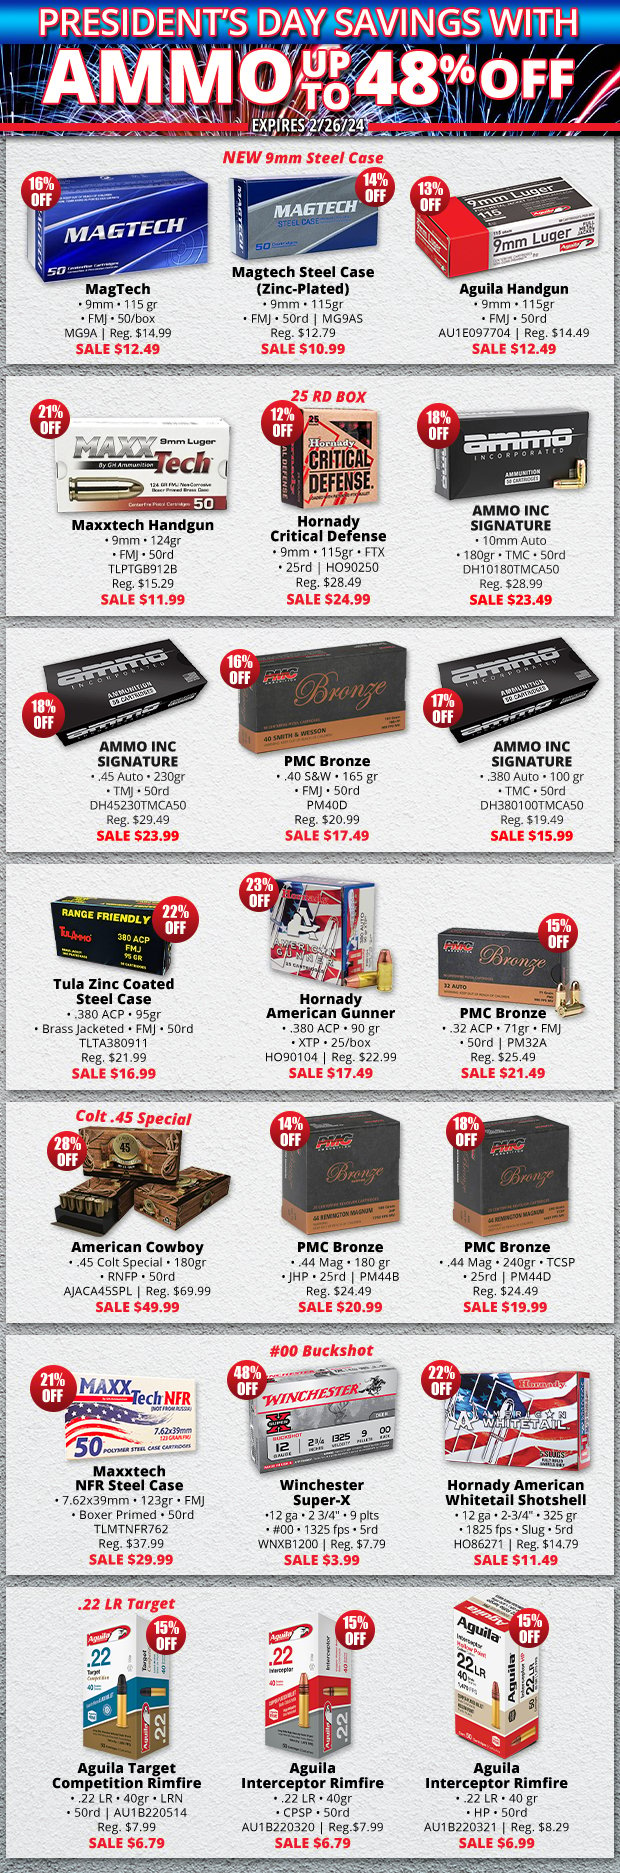 Up to 48% Off Ammo with Presidents Day Deals!